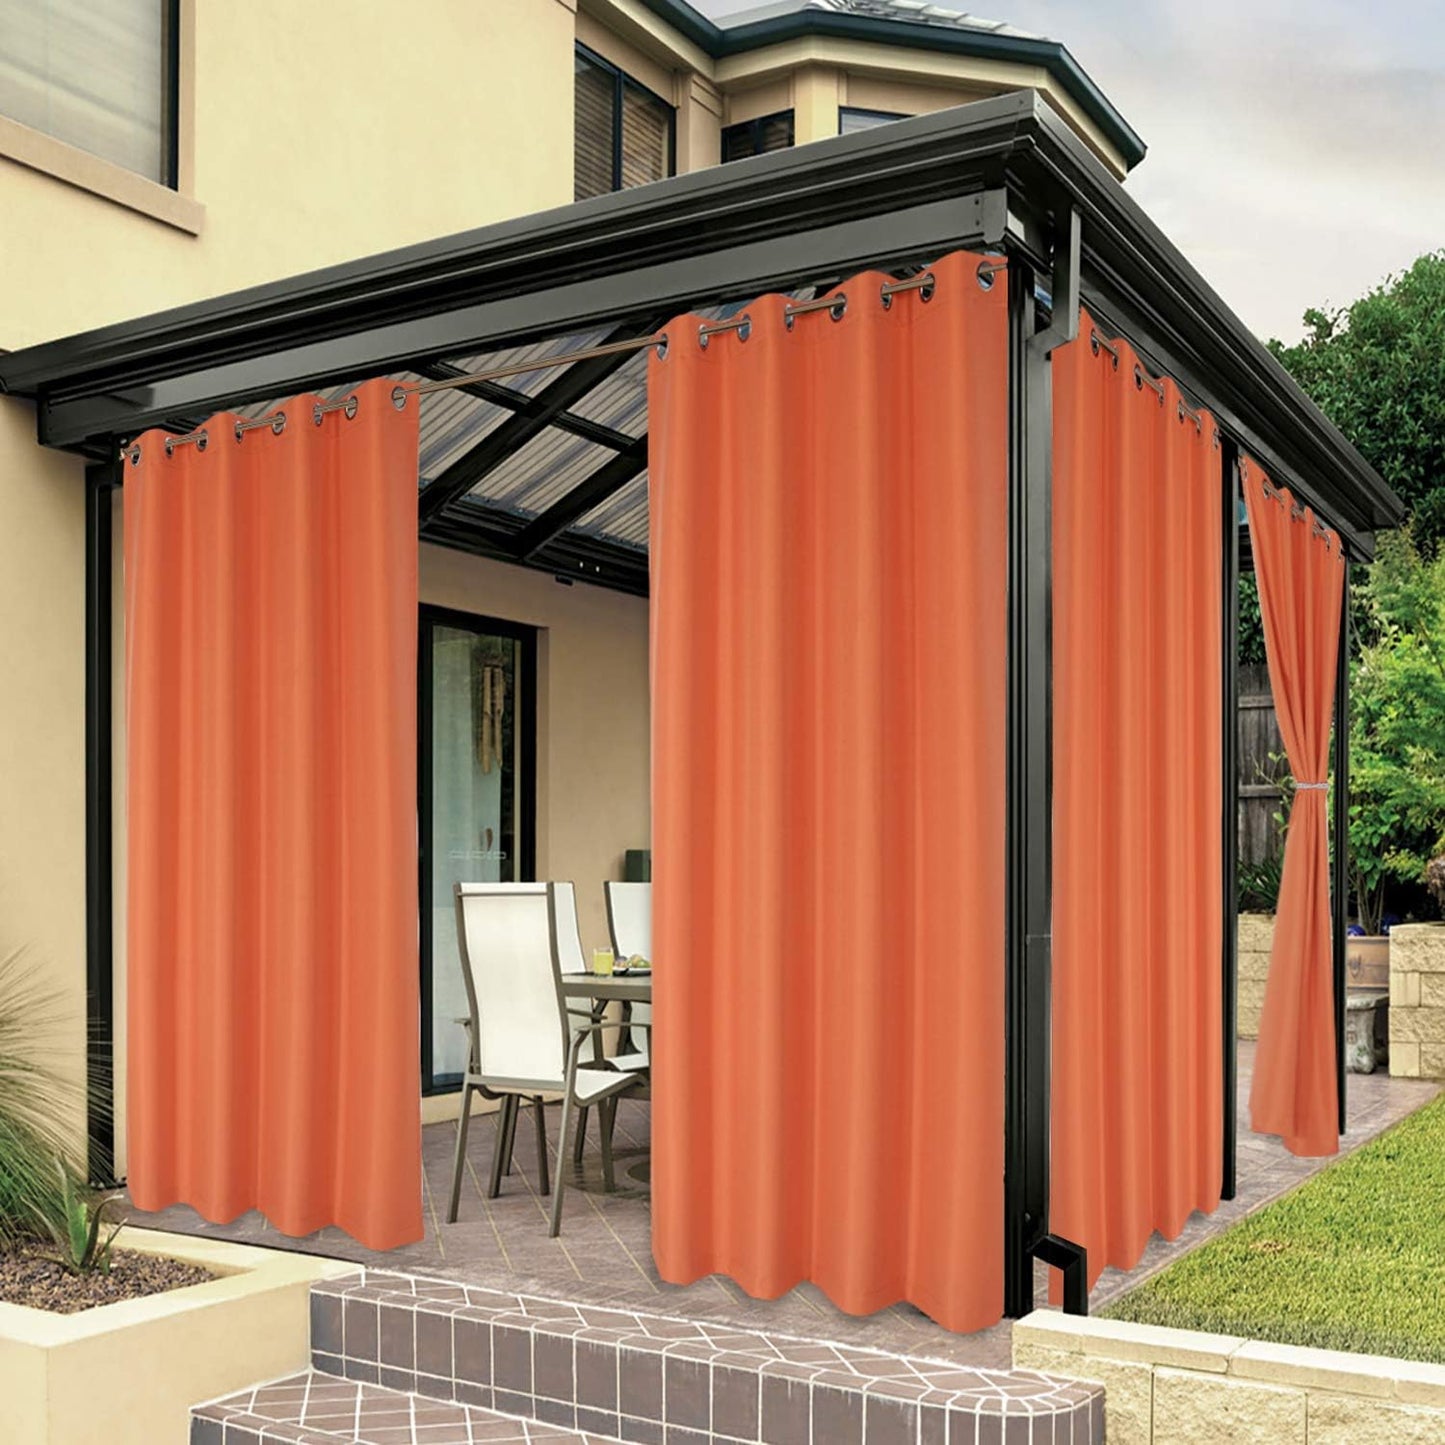 BONZER Outdoor Curtains for Patio Waterproof, Premium Thick Privacy Weatherproof Grommet outside Curtains for Porch, Gazebo, Deck, 1 Panel, 54W X 84L Inch, White  BONZER Mecca Orange 84W X 84L Inch 